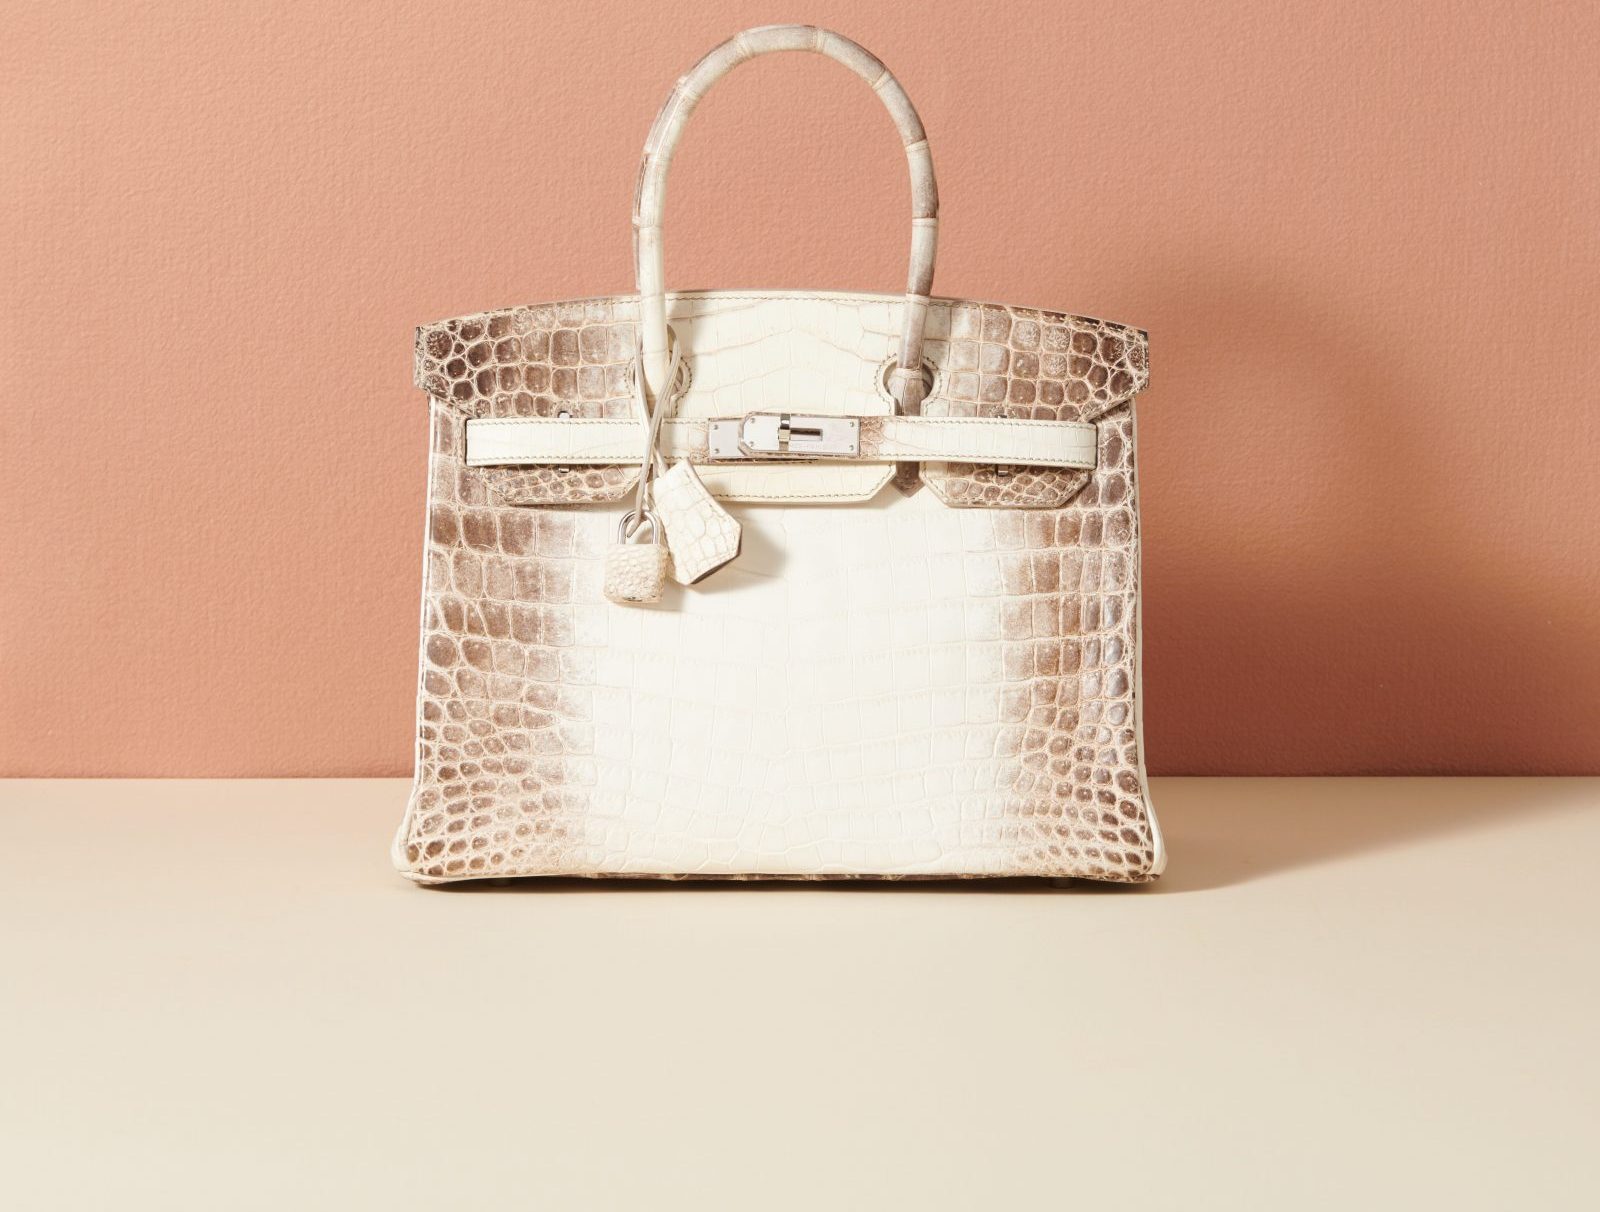 Are Birkin Bags Really a Better 